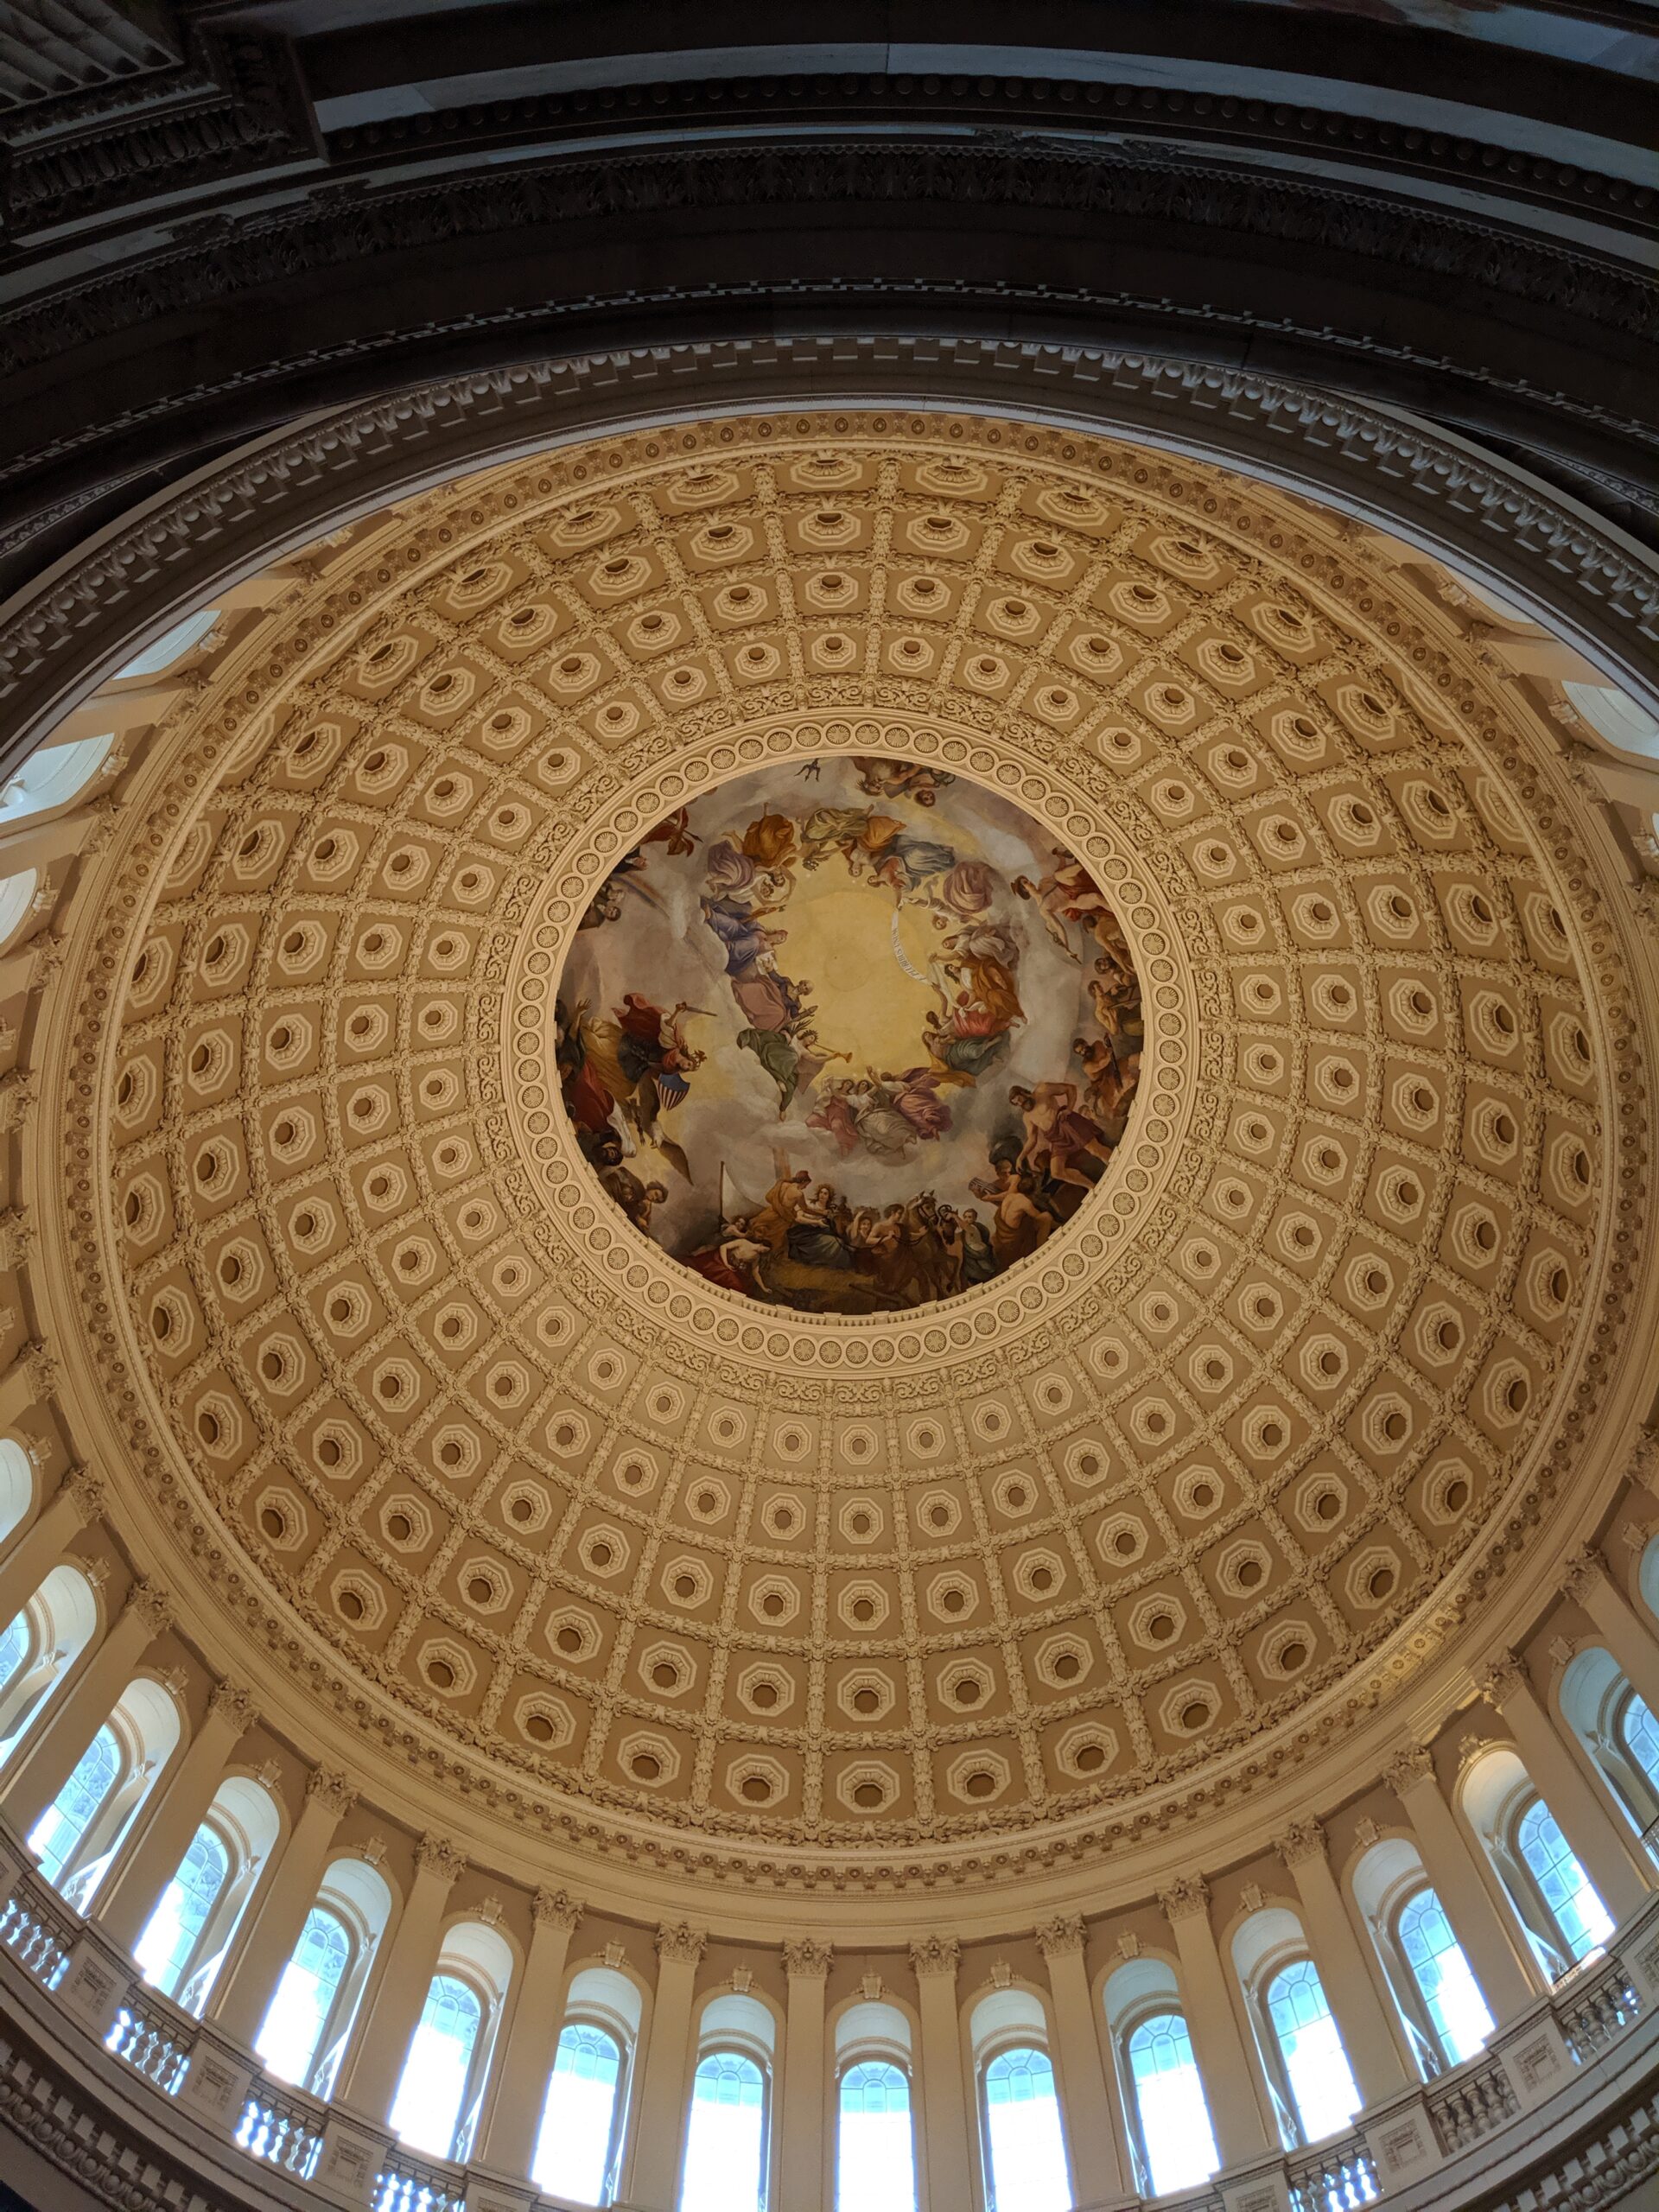 US Capitol rotunda from inside looking up